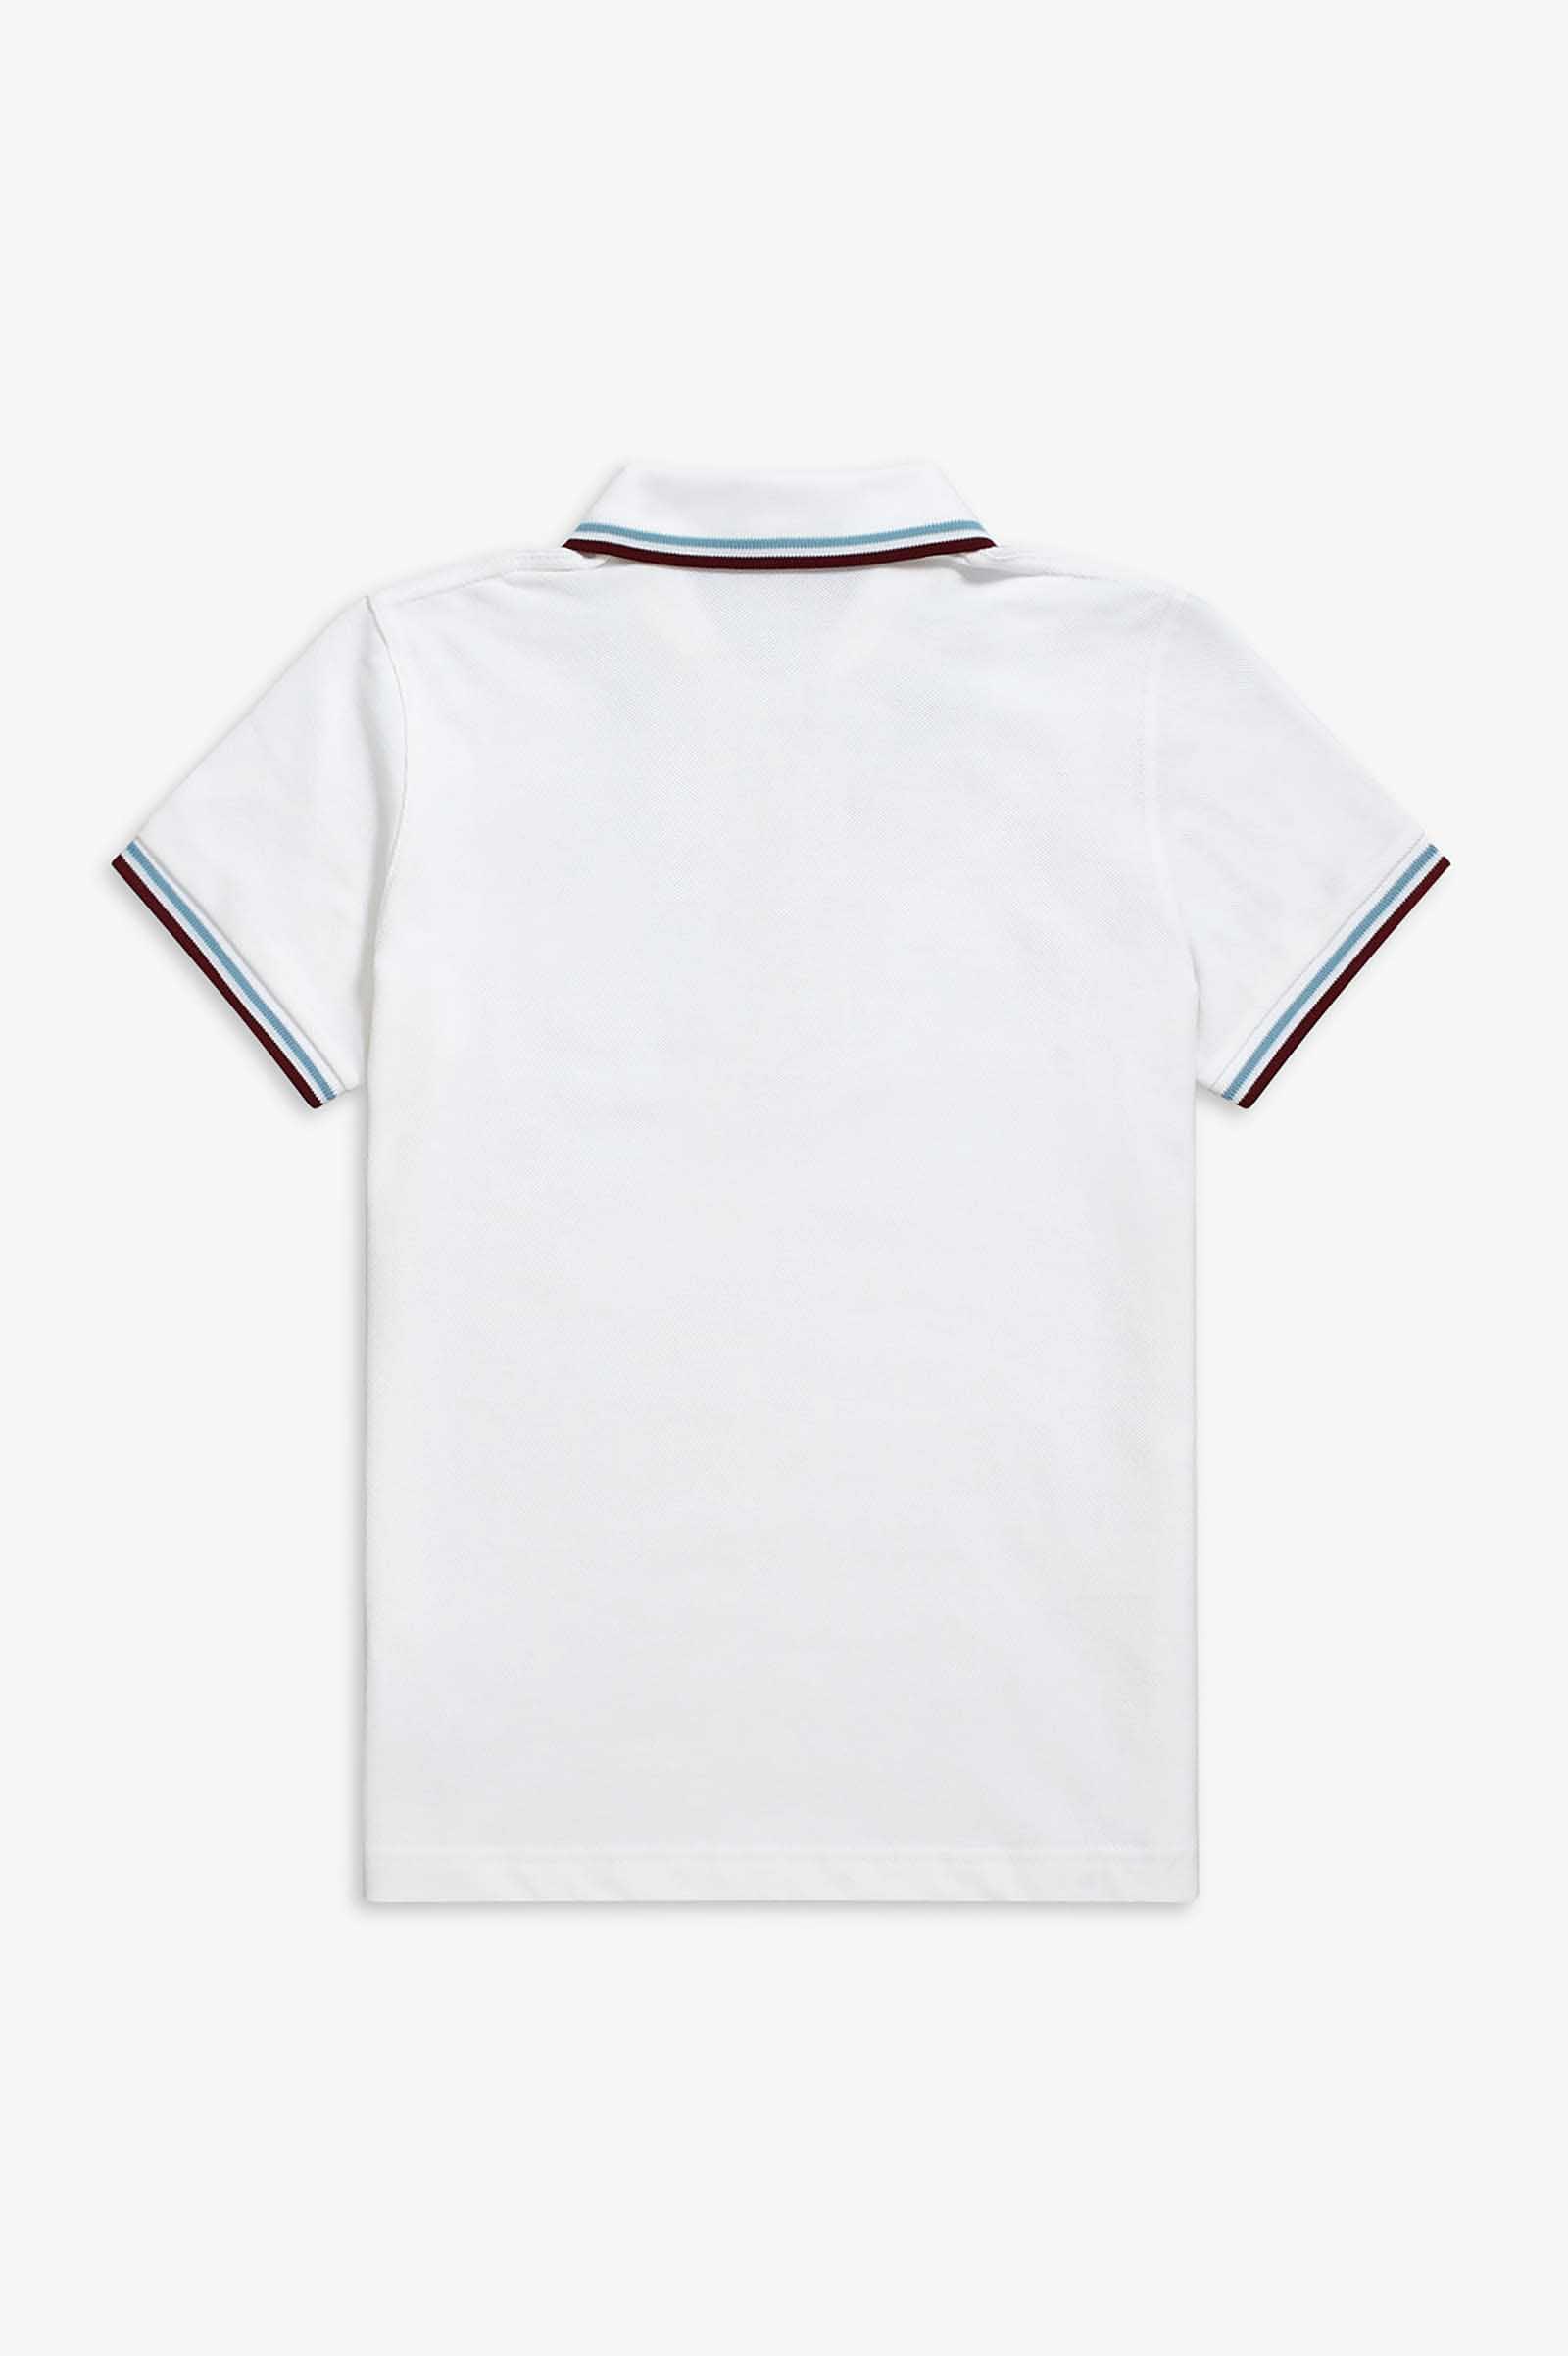 The Fred Perry Shirt - G12(10 301：WHITE / MAROON): | FRED PERRY JAPAN ...